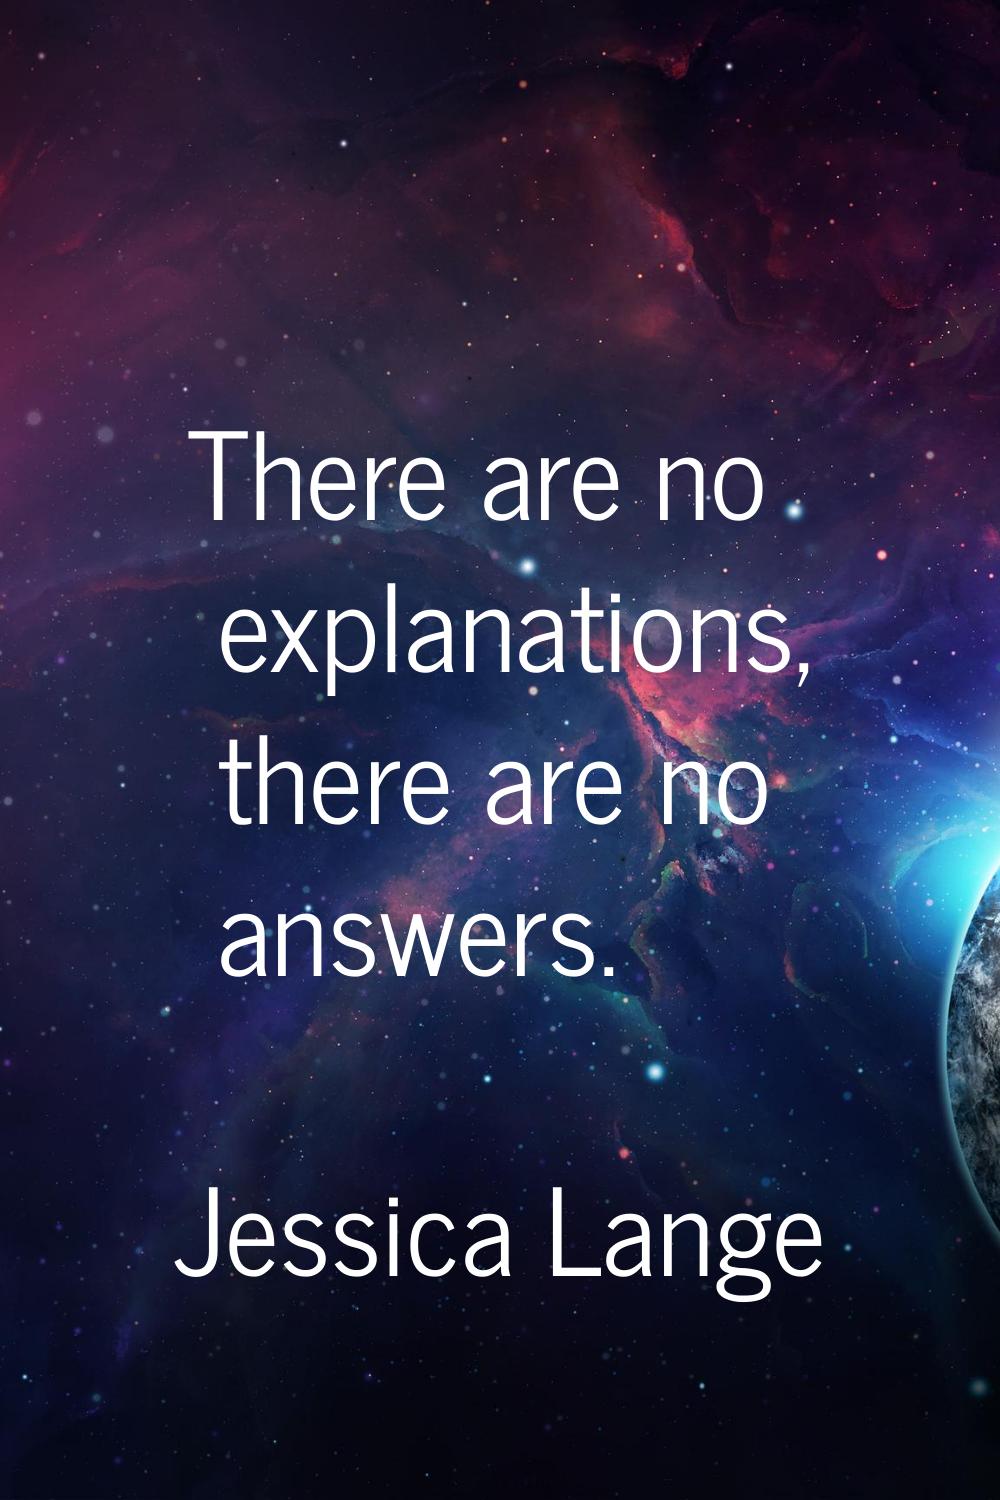 There are no explanations, there are no answers.